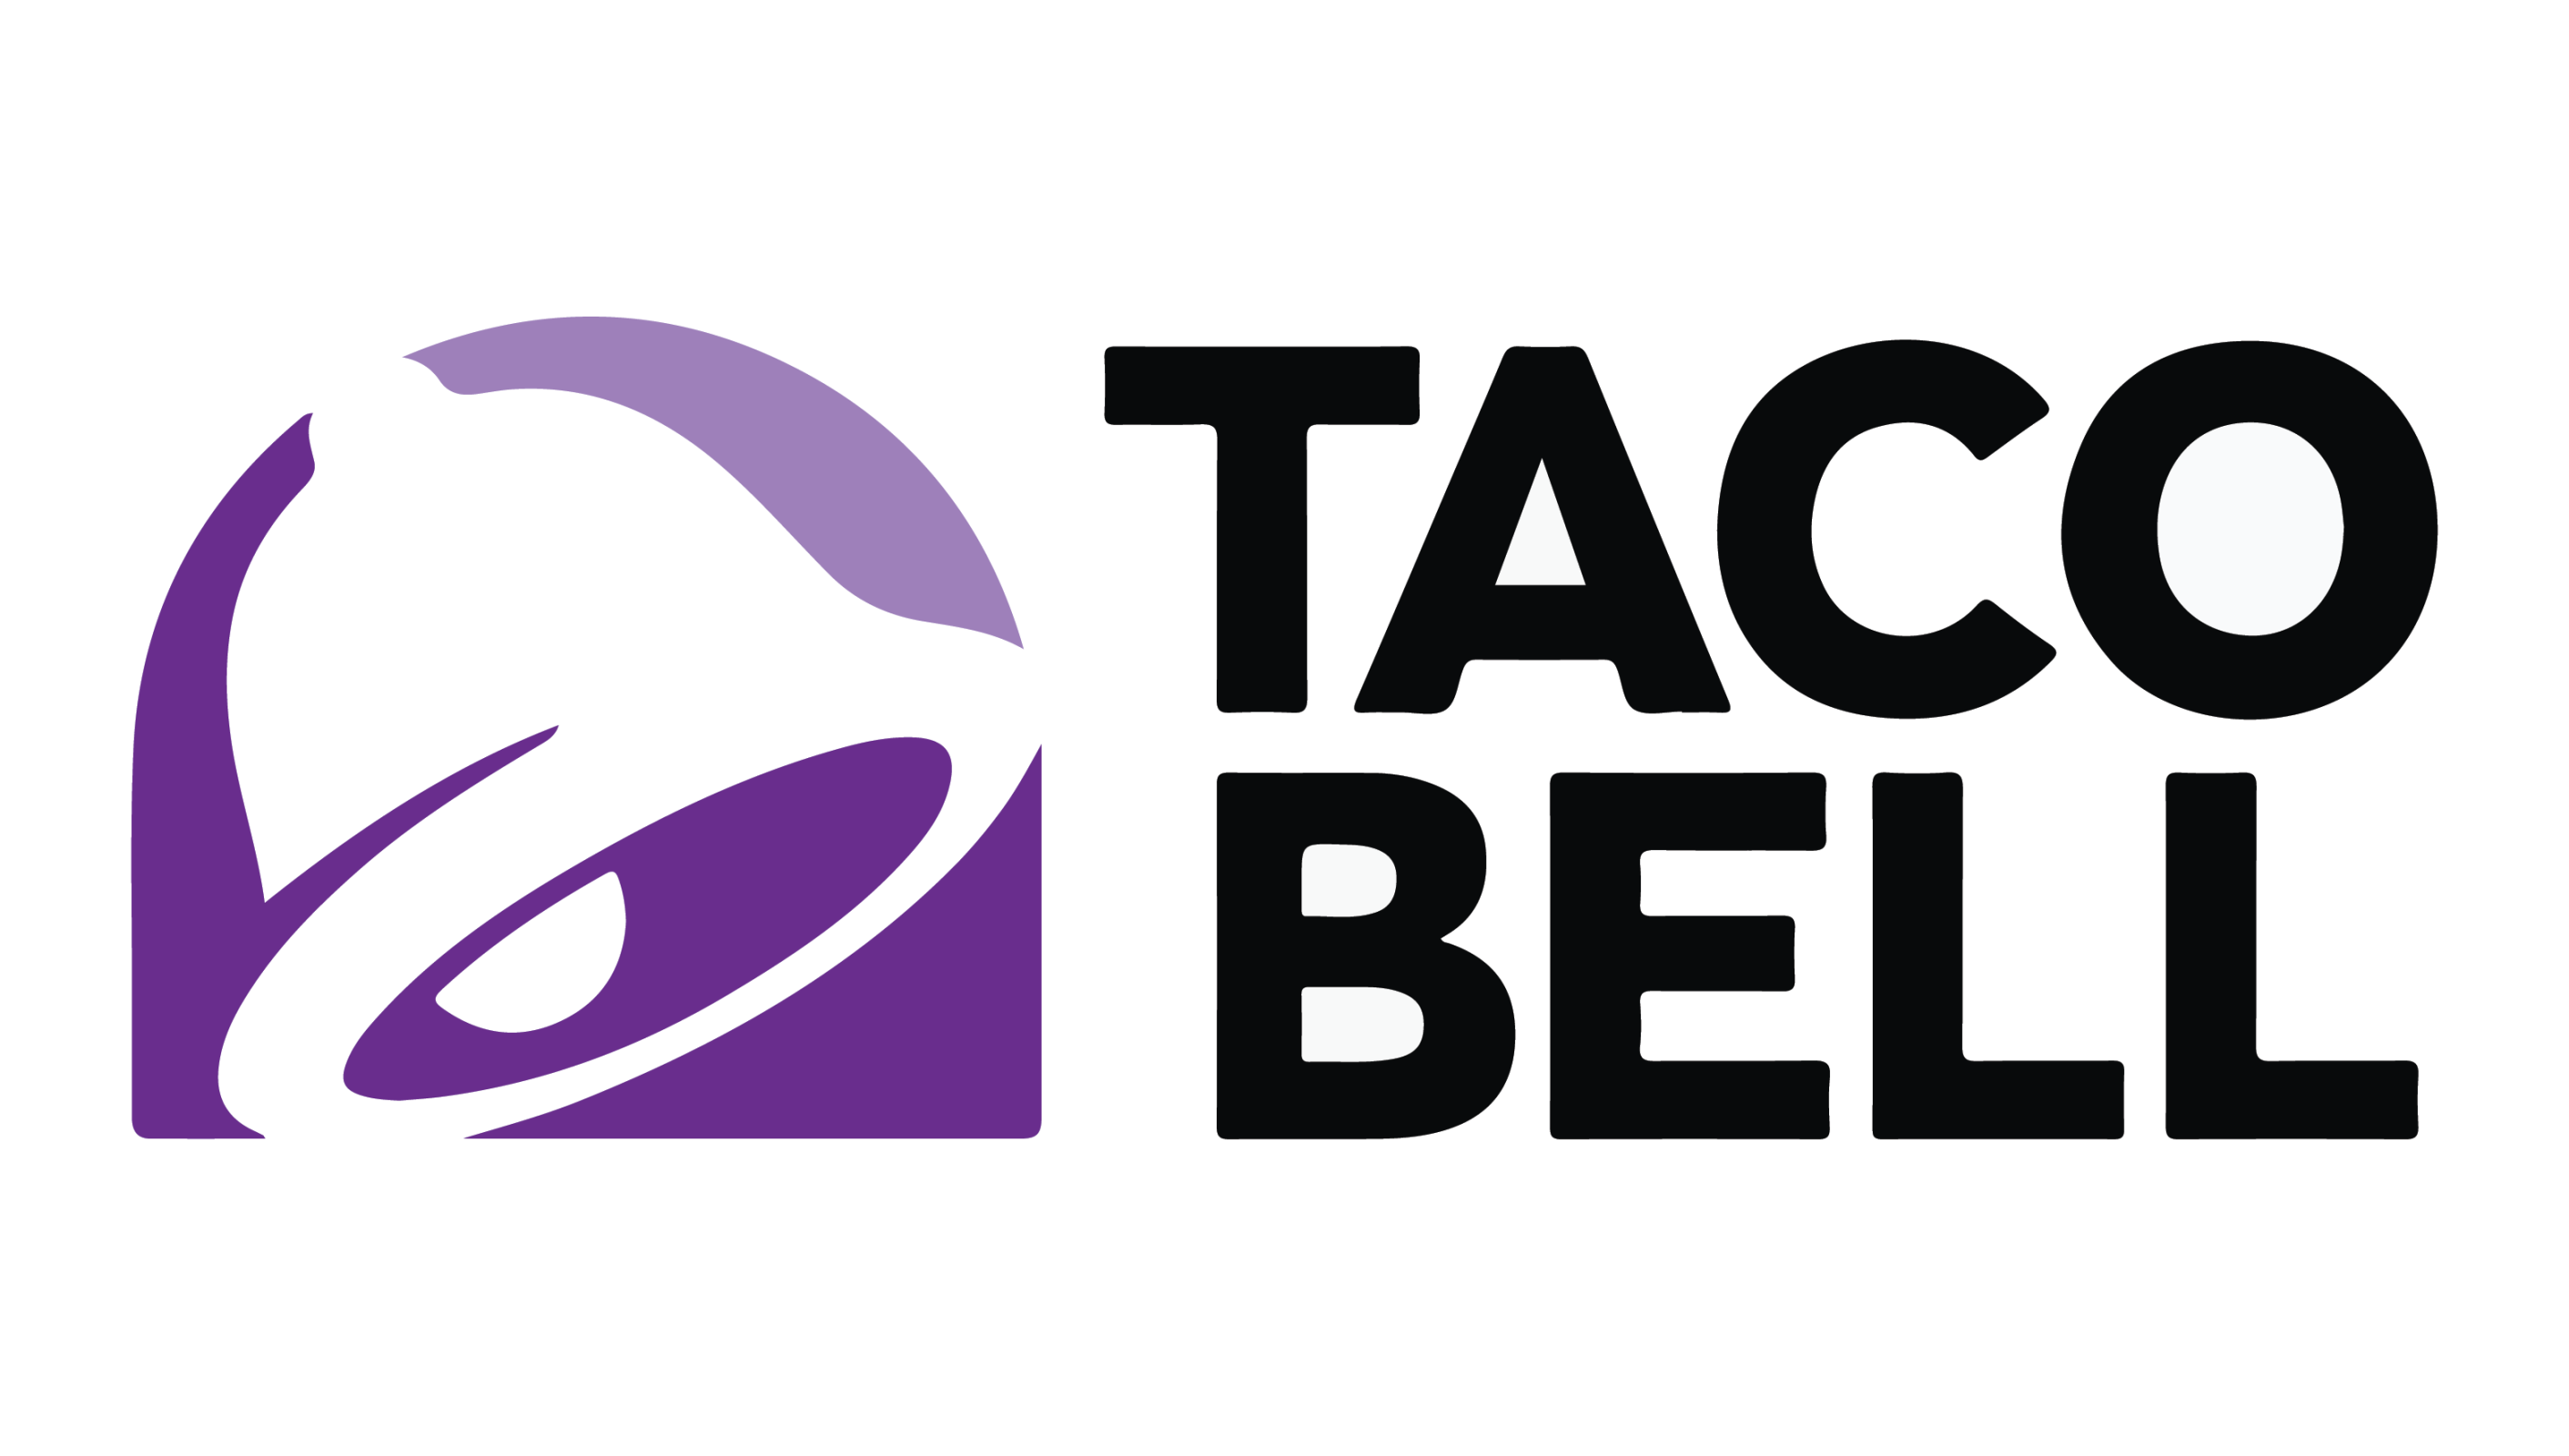 Taco Bell's Image